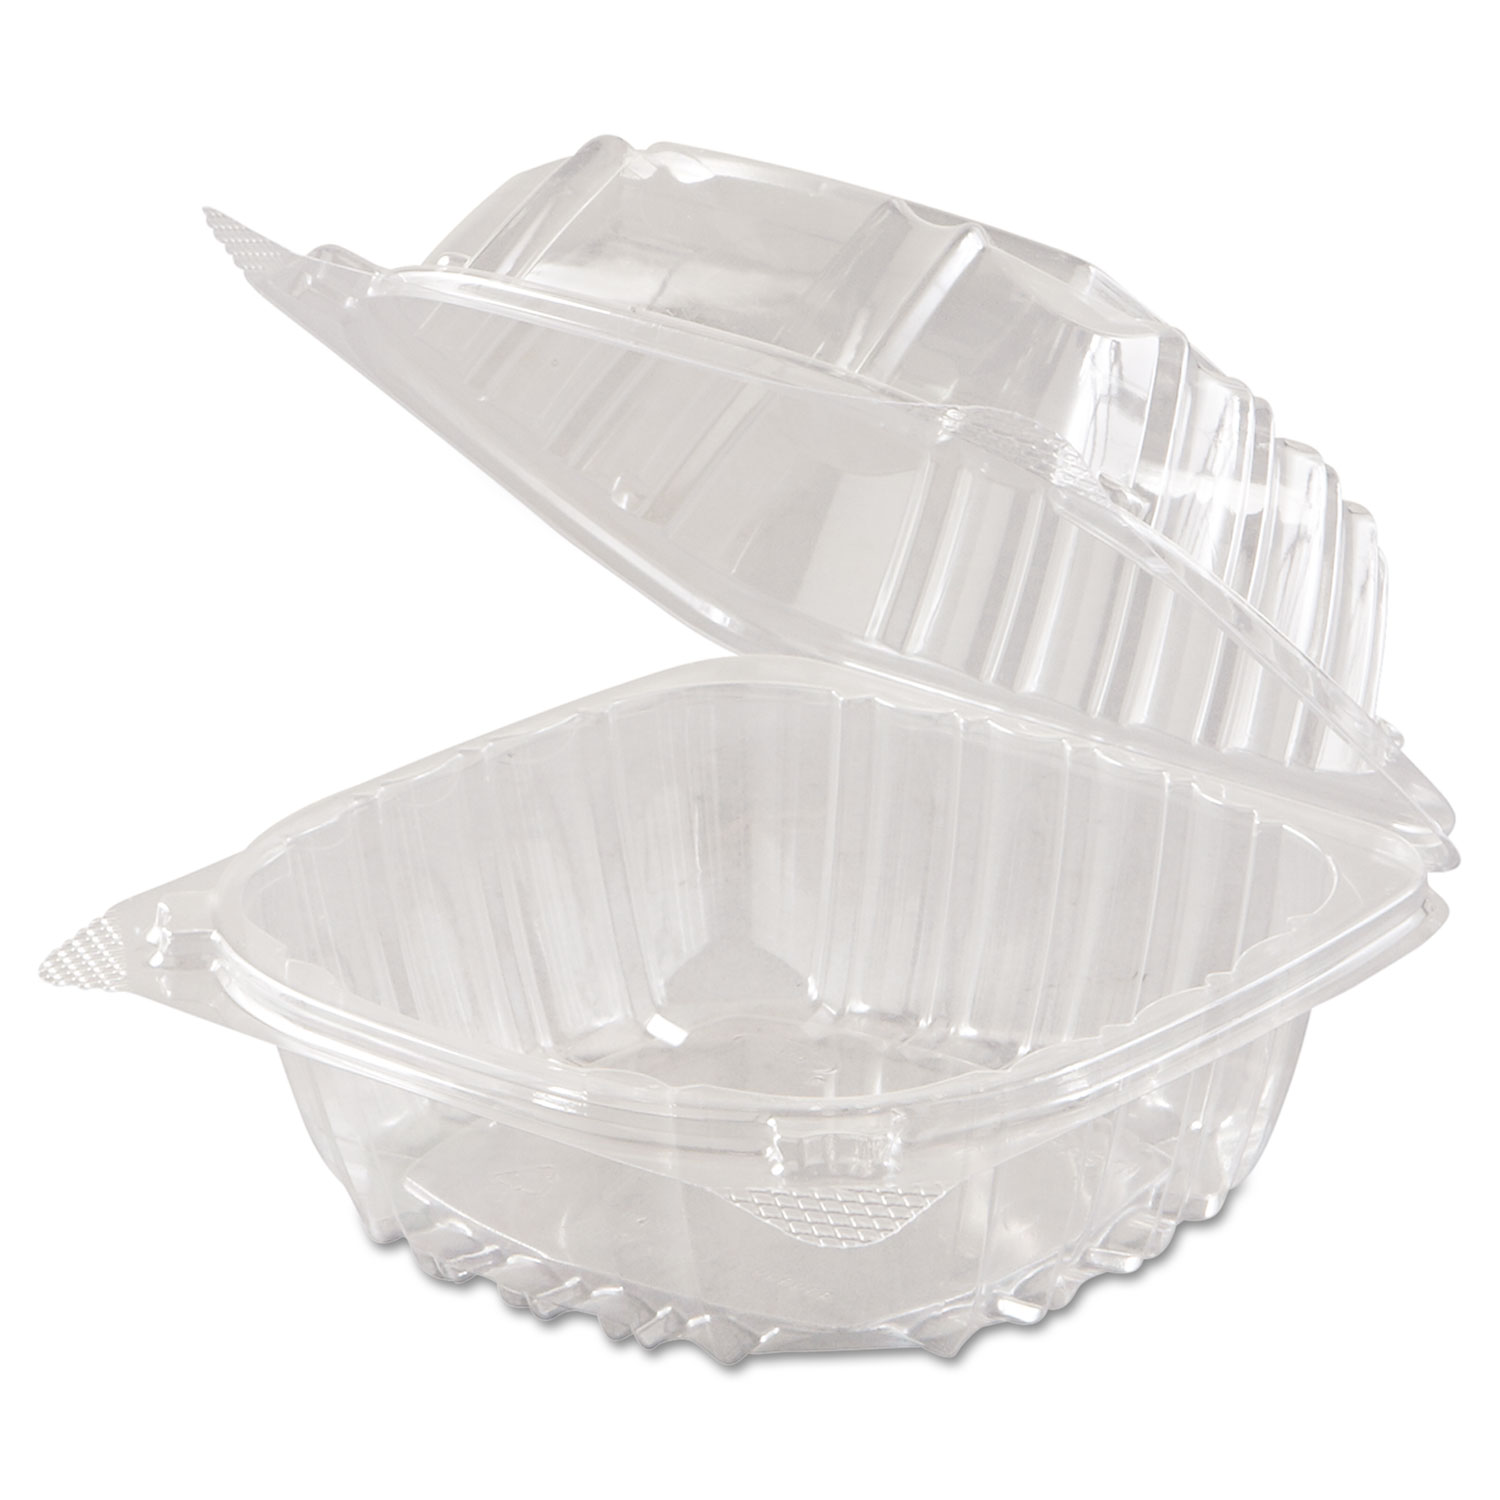 ClearSeal Hinged-Lid Plastic Containers, 6 x 5 4/5 x 3, Clear, 500/Carton